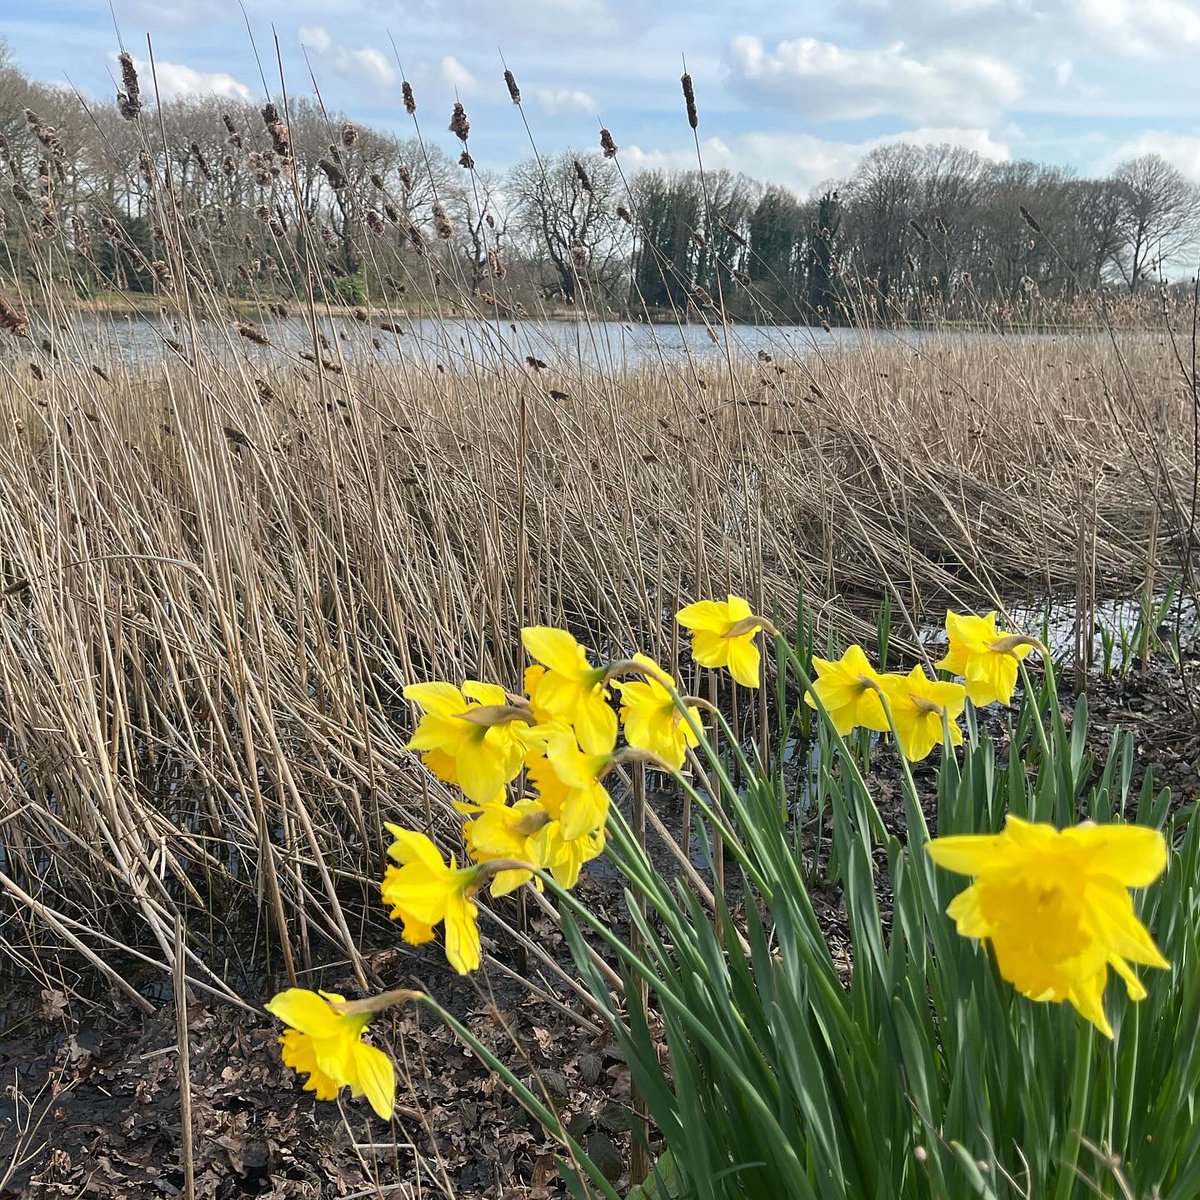 It’s been a long time coming but spring has arrived officially. With the great work the greenkeepers have put in during the winter months, this pays dividends going forwards. Who’s out this weekend? #golf #mindset #essex #spring #march #daffodils @ThorndonParkGC @GcThorndon